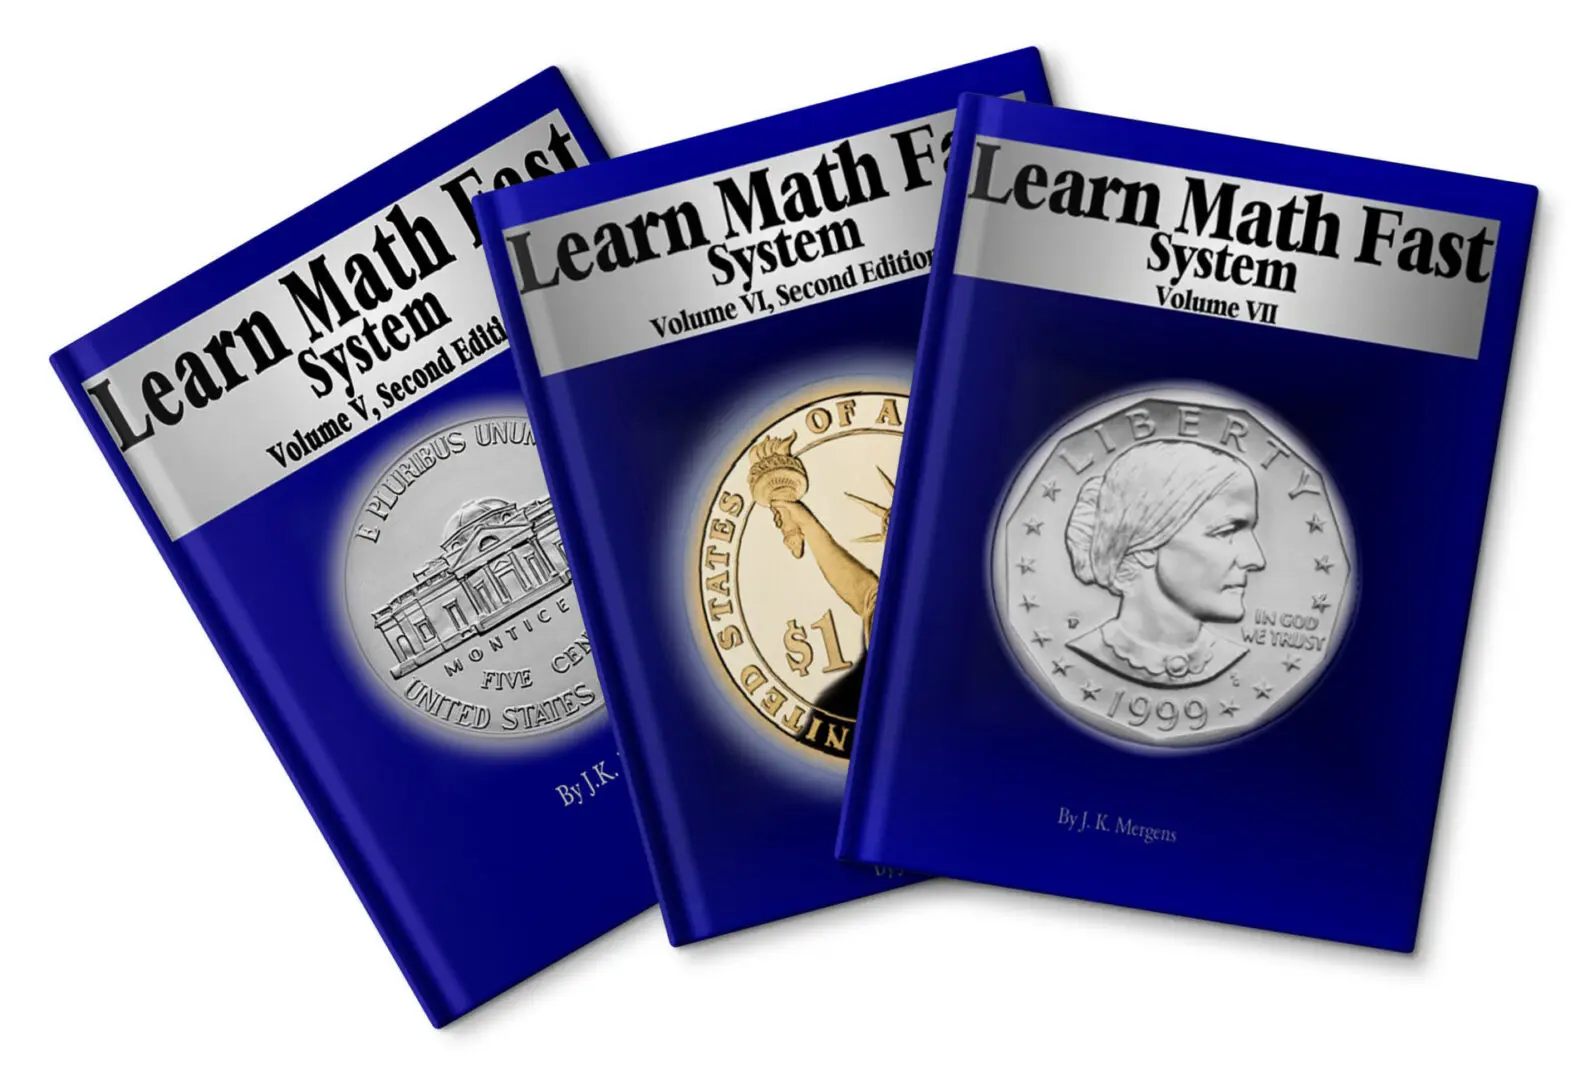 Three books about the math system are shown.